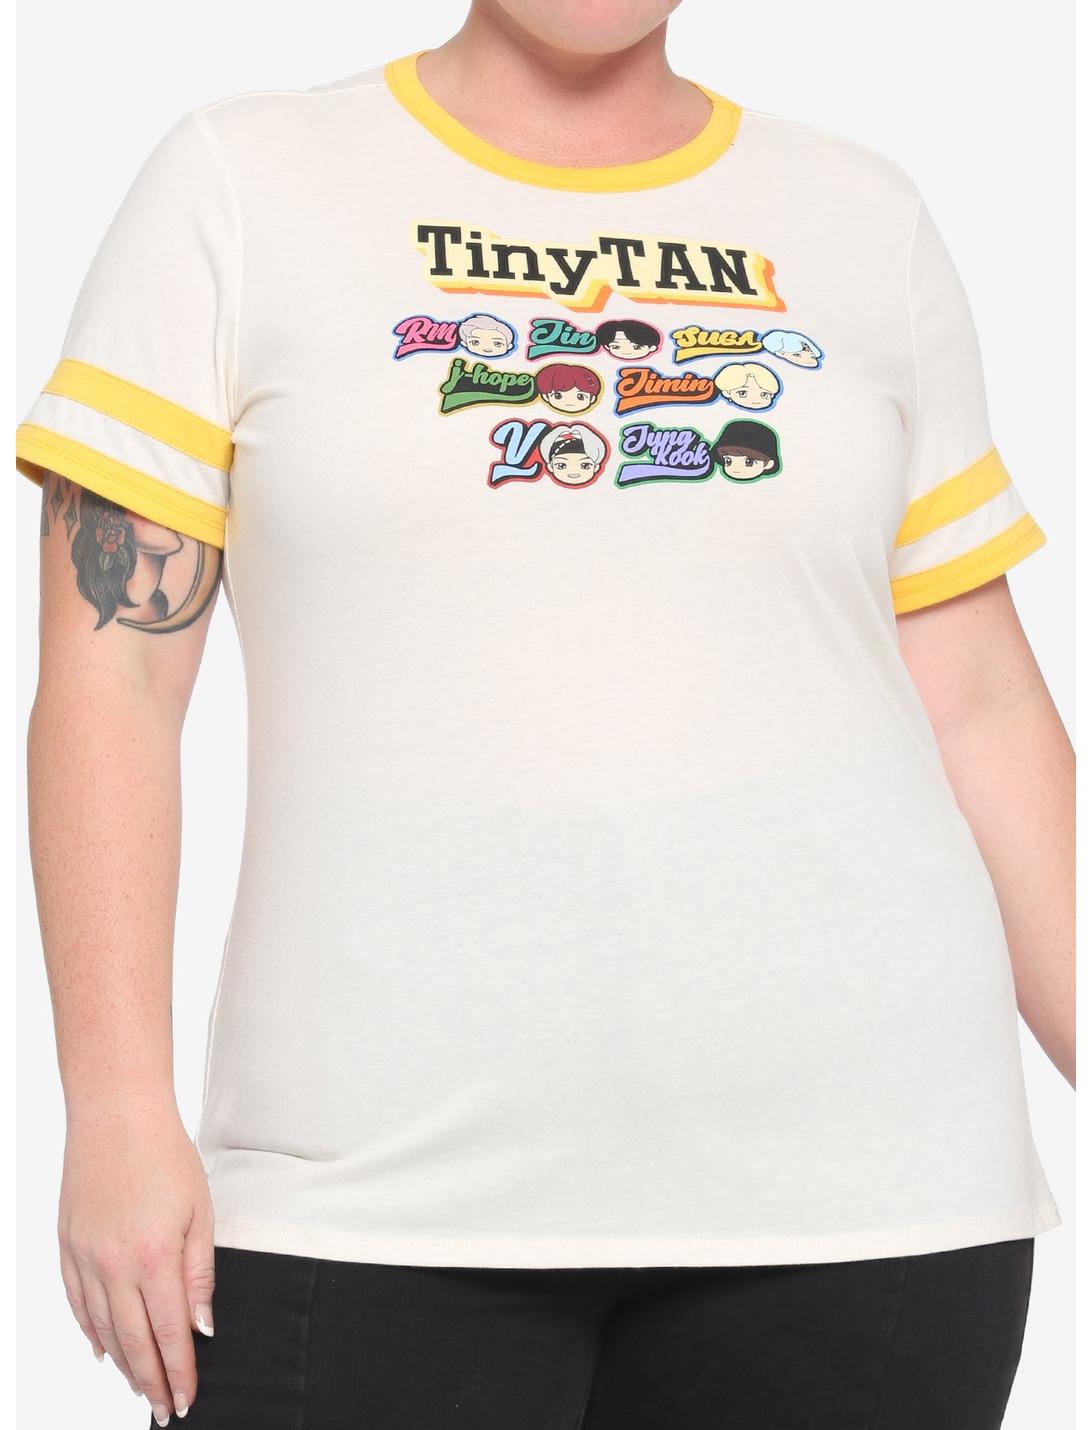 TinyTAN Wappen Athletic Girls T-Shirt Plus Size Inspired By BTS Hot Topic Exclusive, CREAM, hi-res